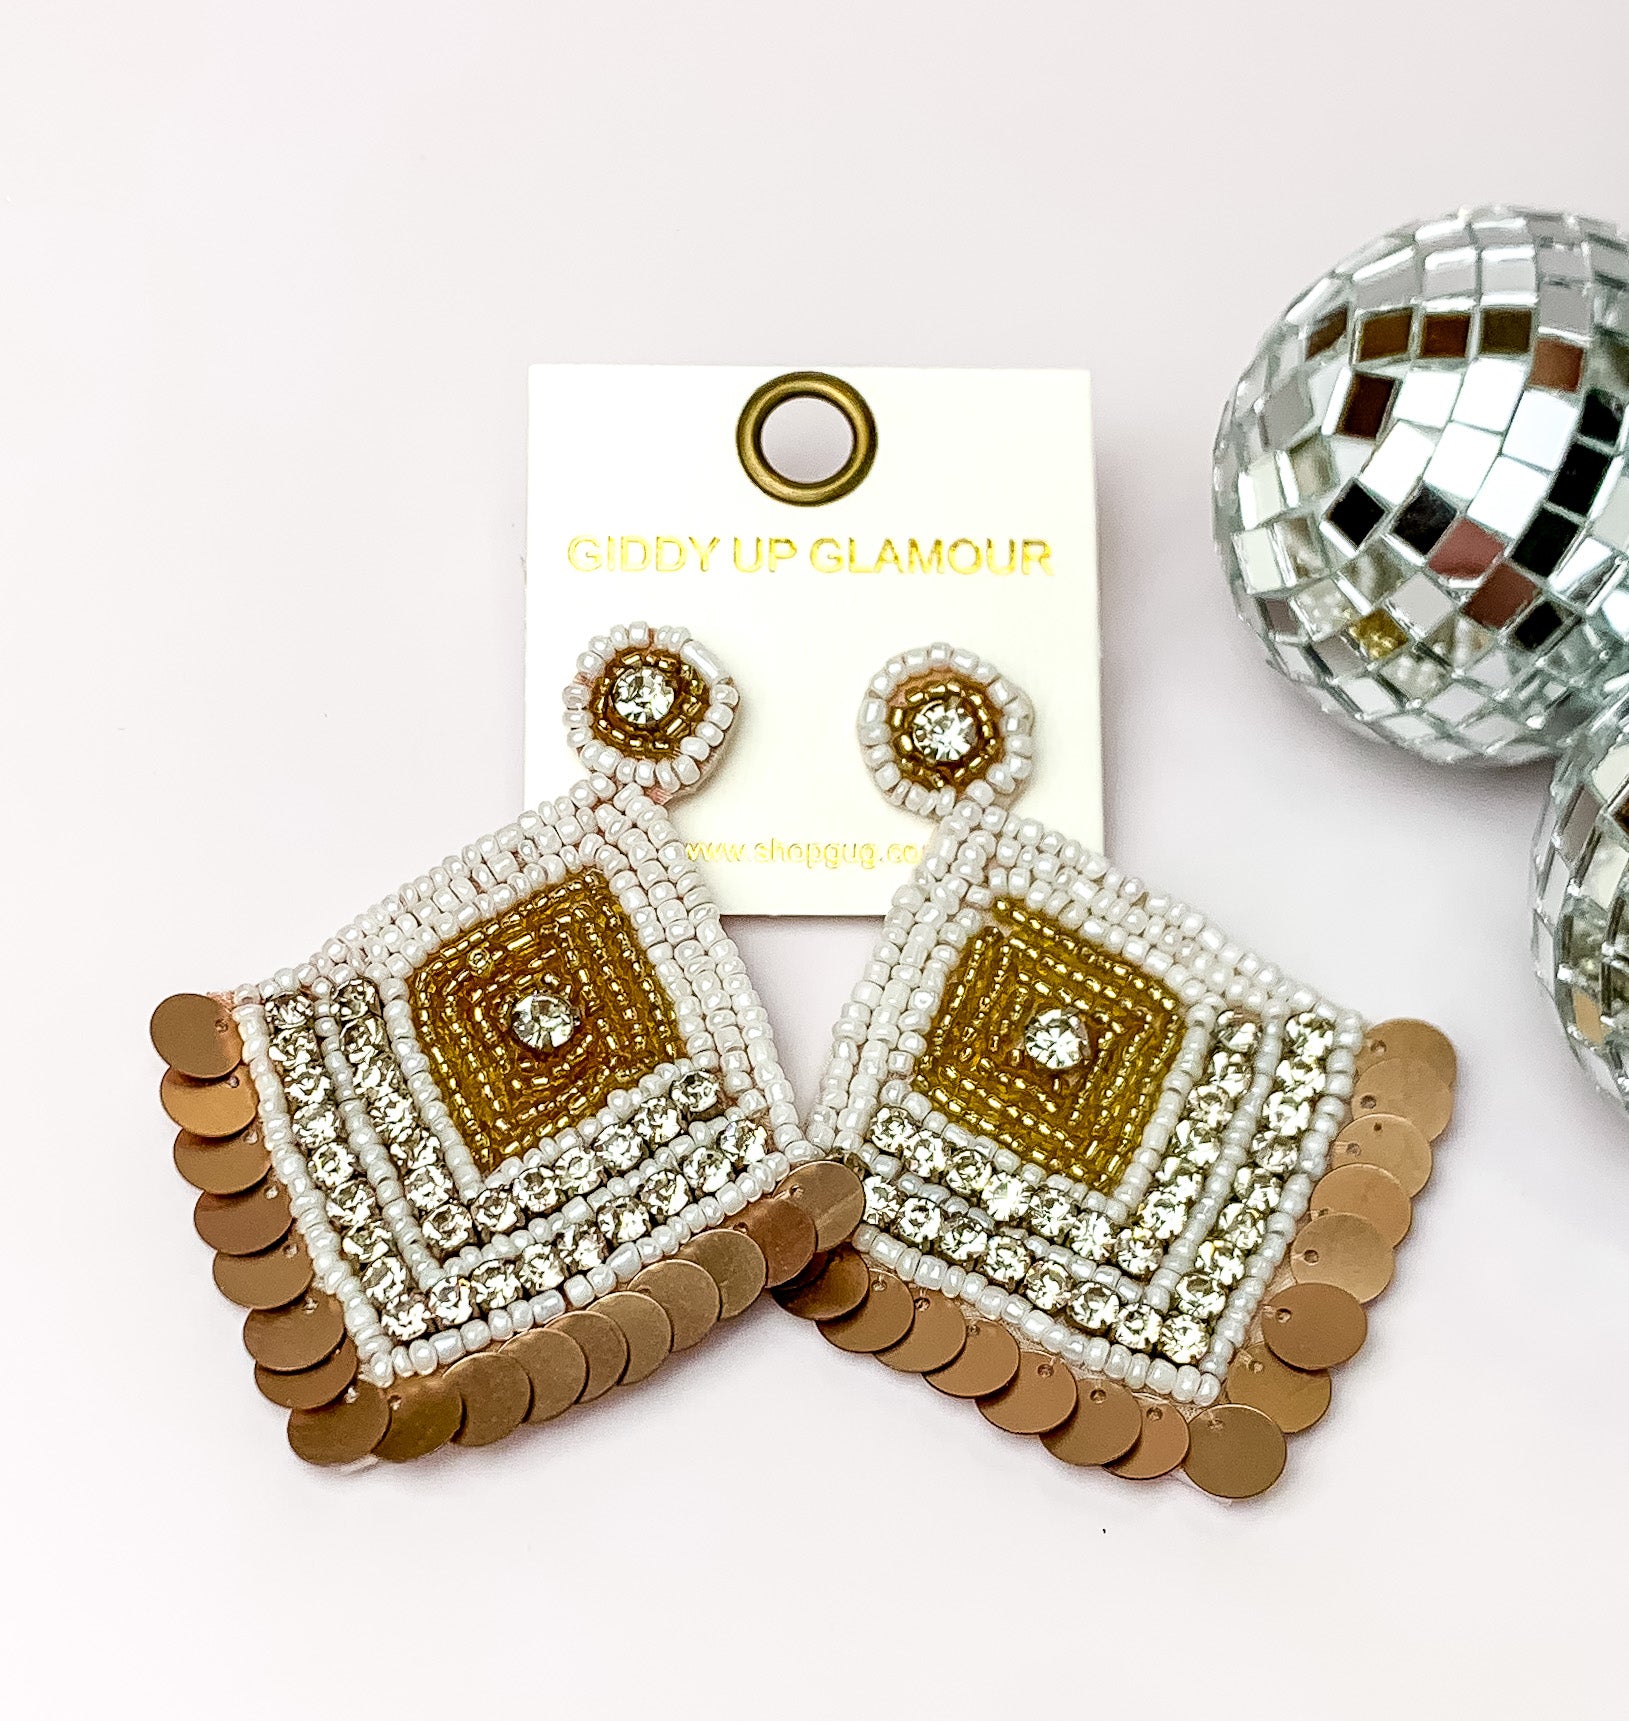 Fashionista Diamond Shaped Beaded Earrings in White, and Gold. Pictured on a white background with disco balls to the right.